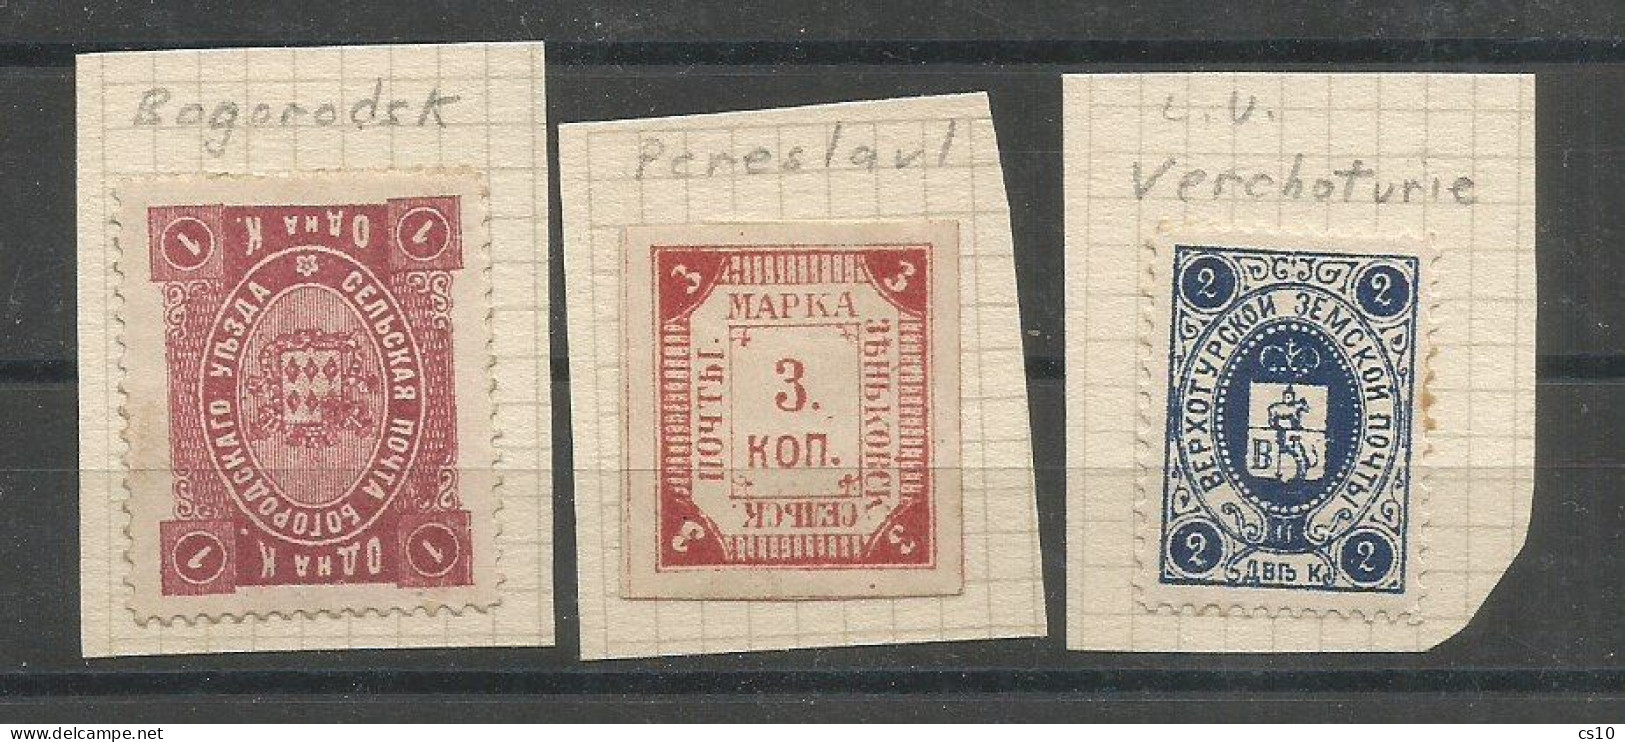 Old Russia Empire & Area #13 Scans Study Lot Of 490 Pcs Mint/Used Including Suomi Finland Levant, Some Piece, Imperf - Colecciones